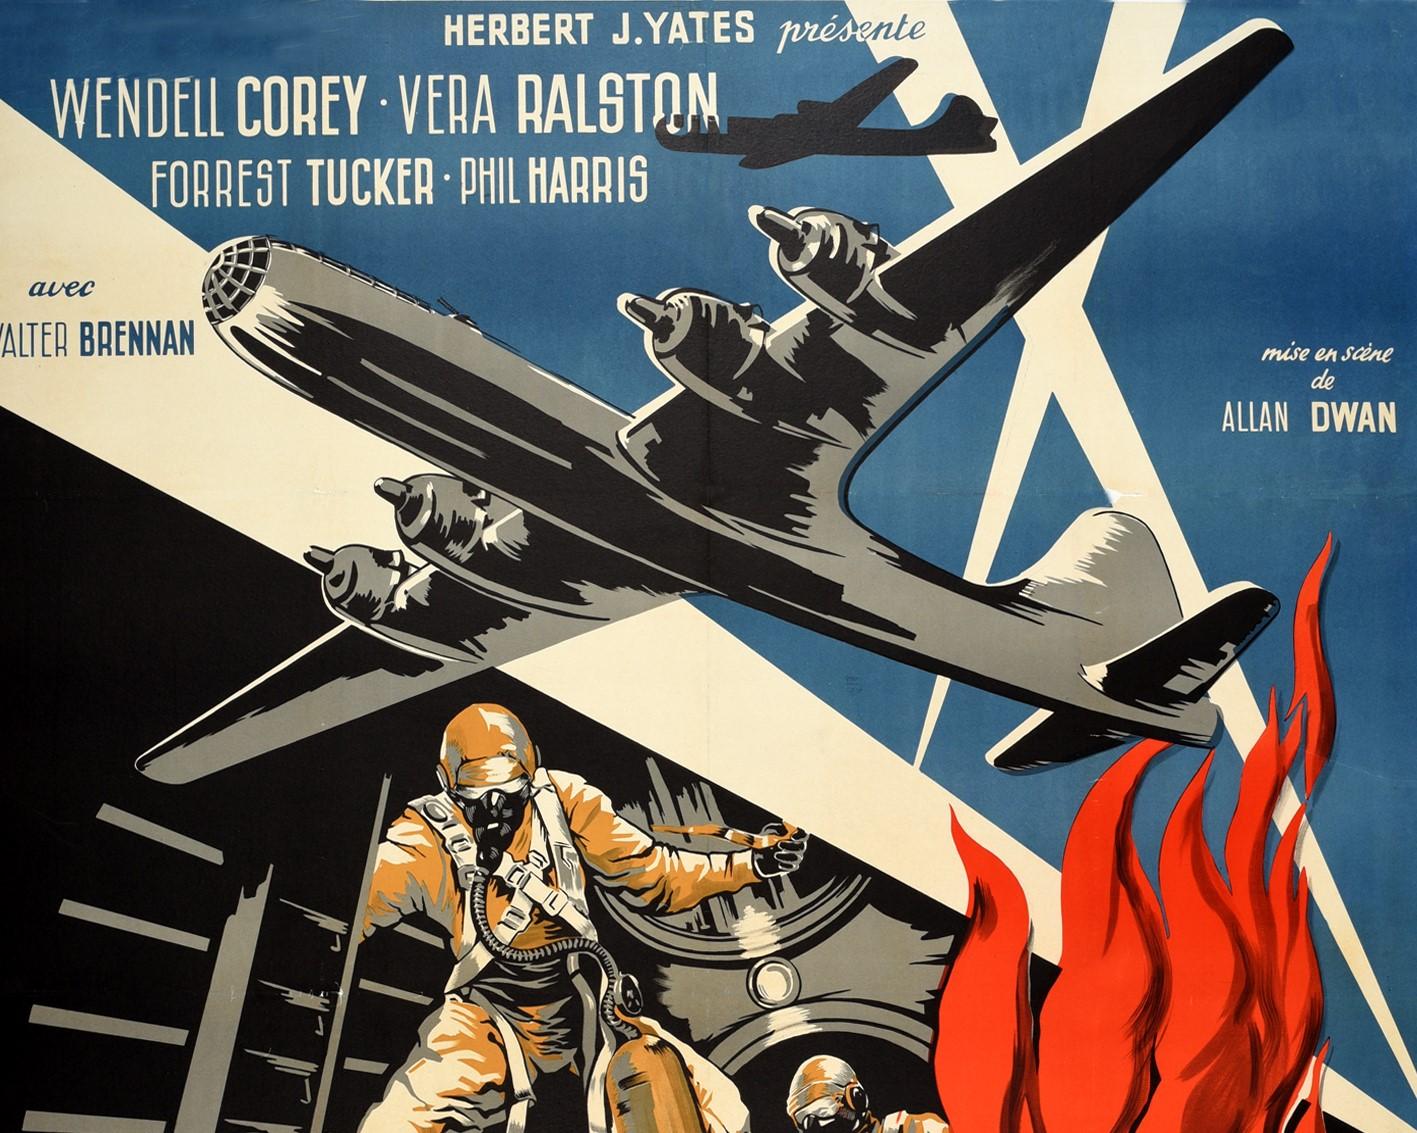 Original vintage movie poster for the French release of the 1951 film about the Boeing B-29 Superfortress bomber training and air raids on Japan during WWII - The Wild Blue Yonder / Tonnerre Sur Le Pacifique - directed by Allan Dwan and starring